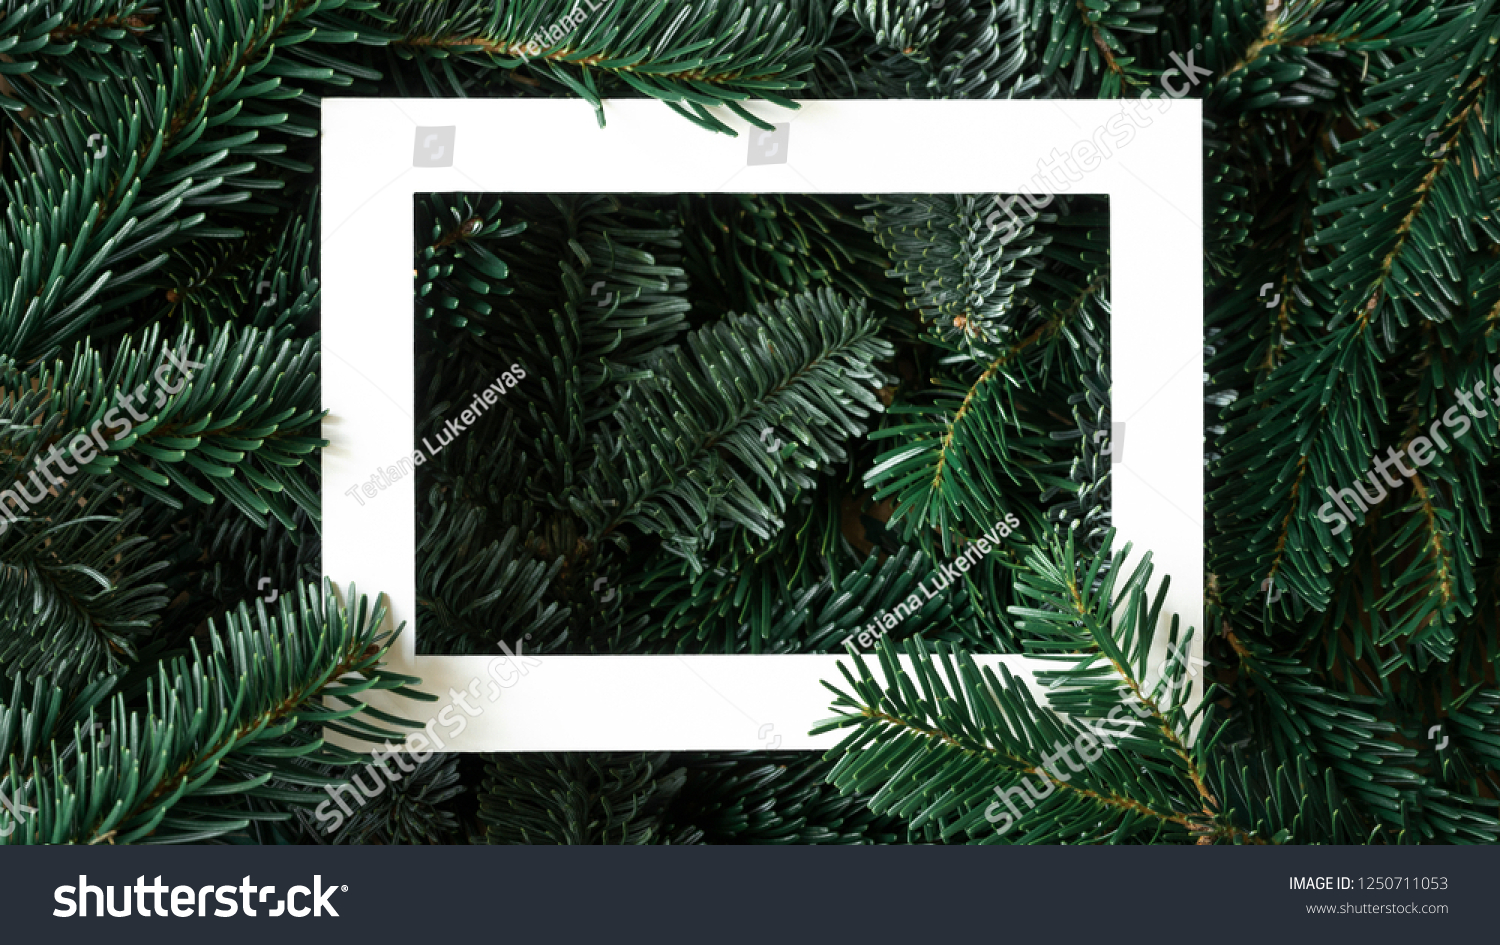 2019 Merry Christmas and happy New Year background with christmas tree branches creative layout and white frame. Nature flat lay concept. #1250711053